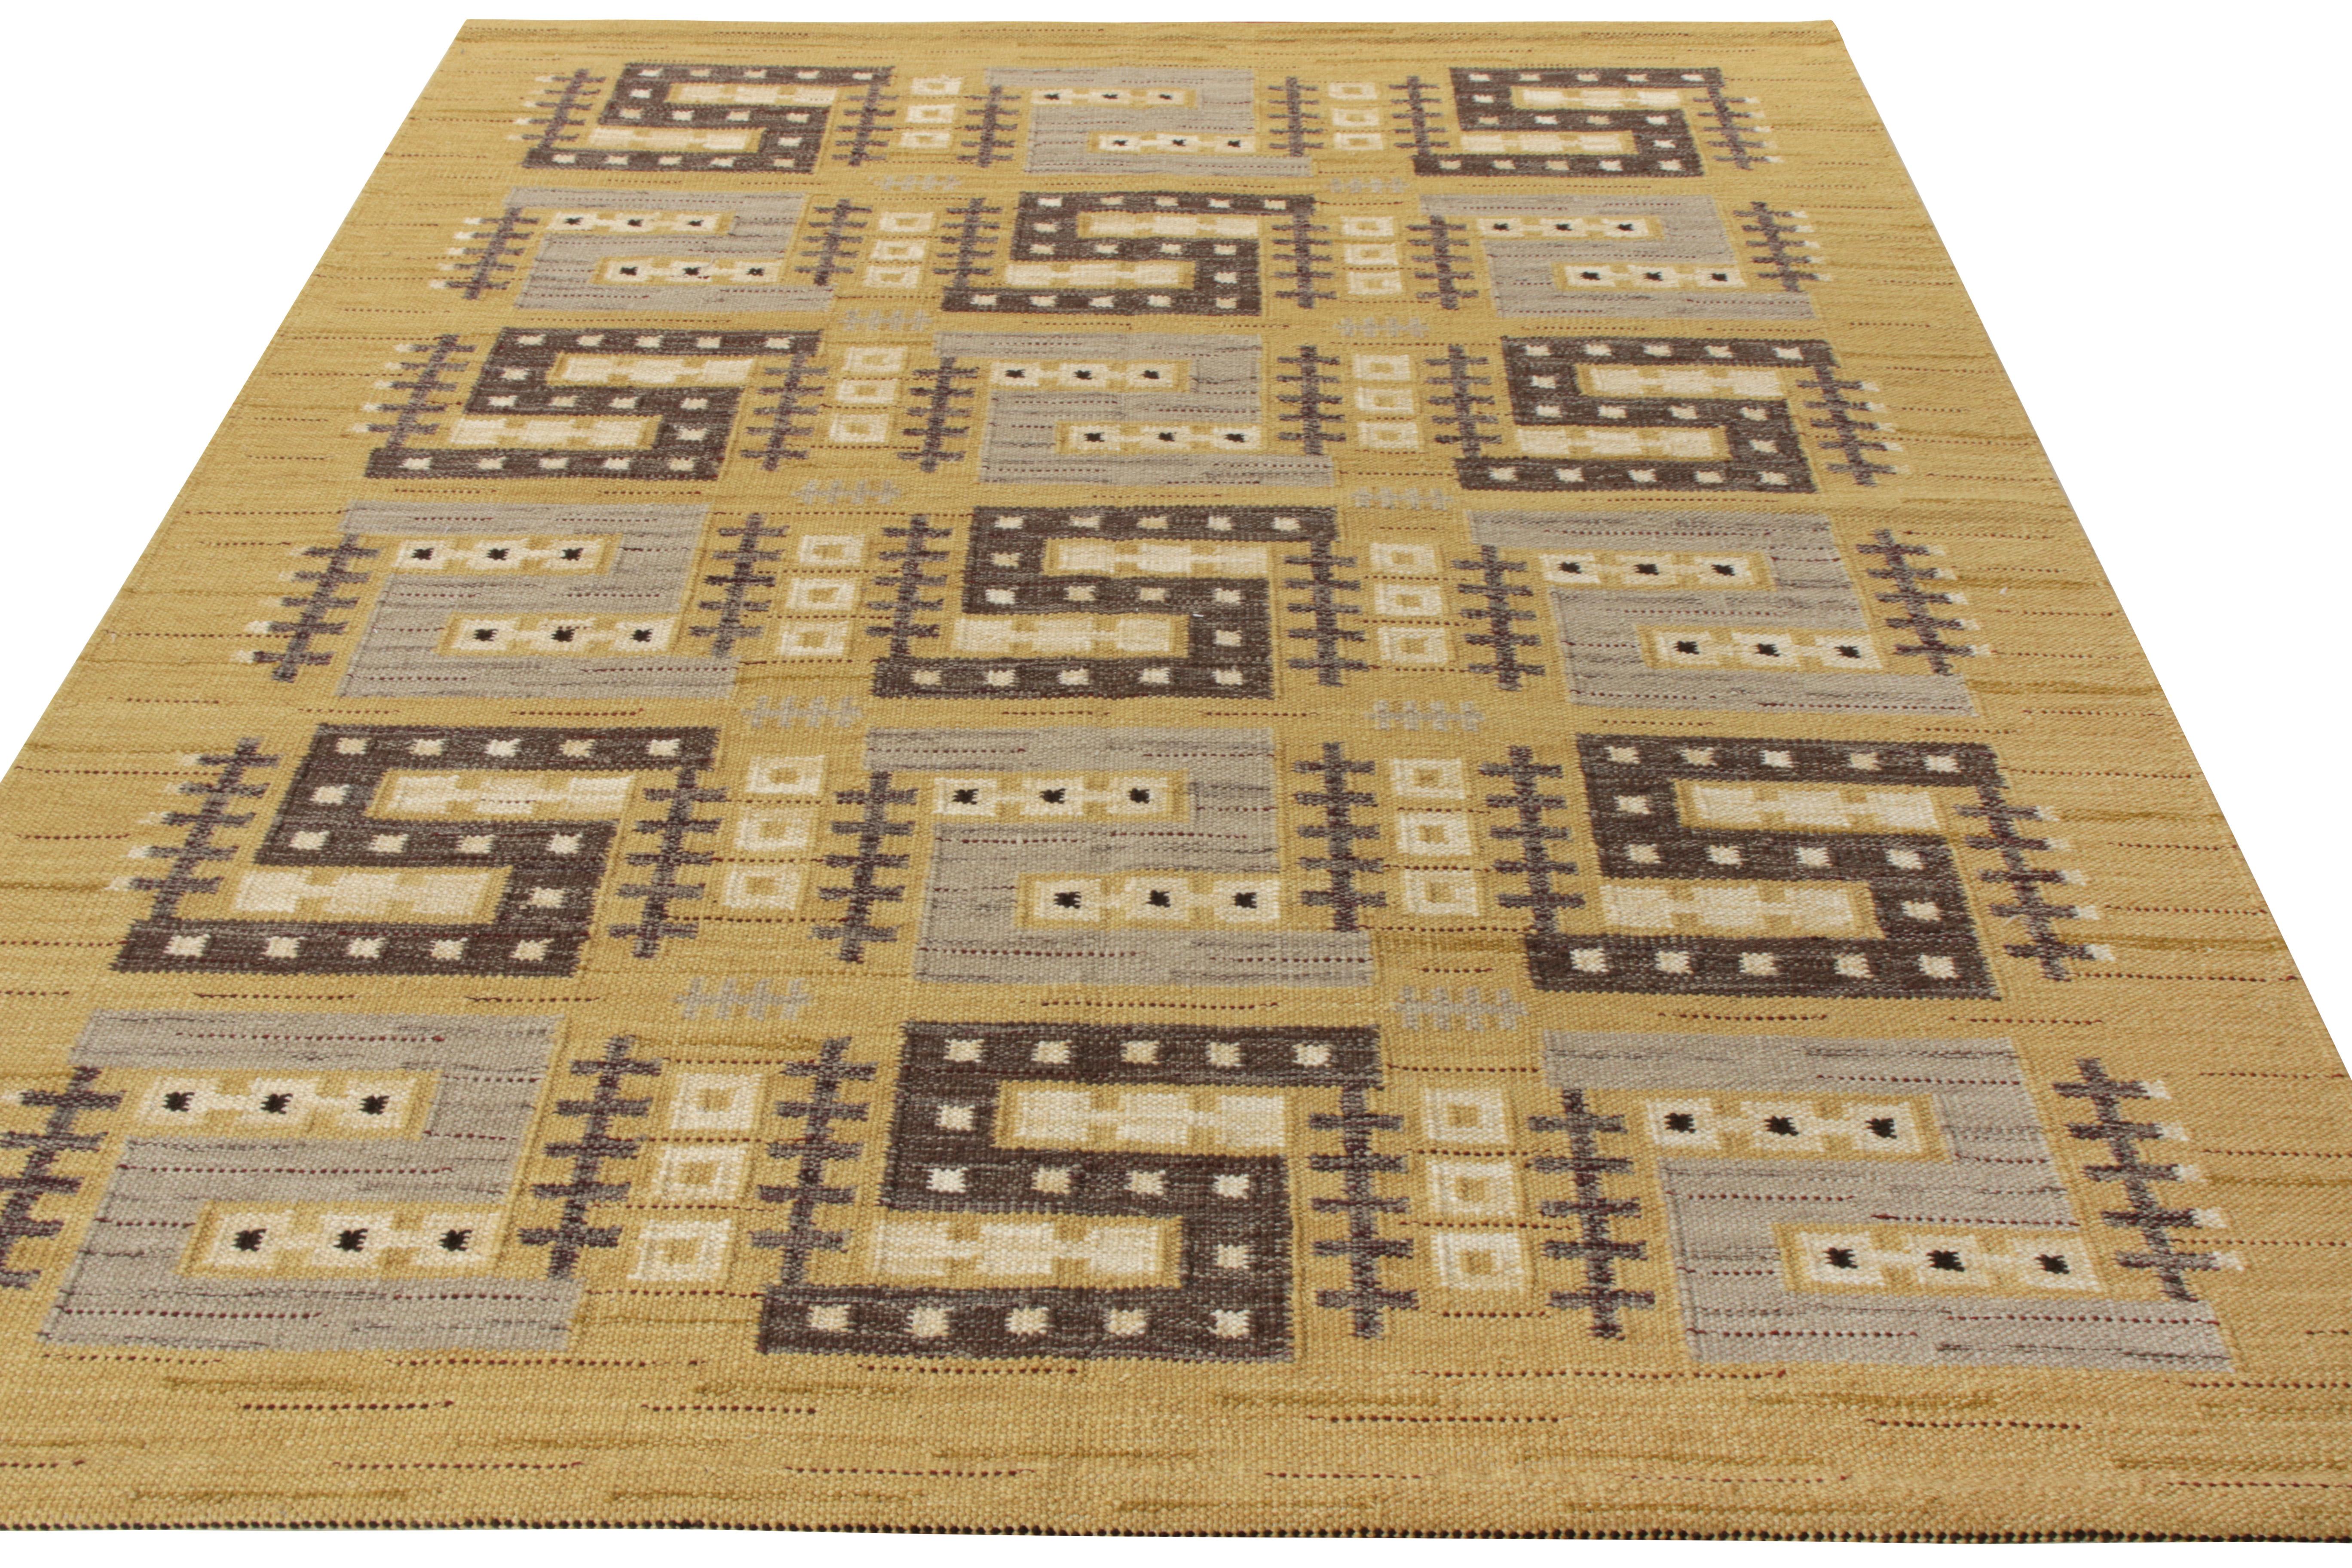 Rug & Kilim presents an 8x10 handwoven wool Kilim from its coveted Scandinavian flat weave collection. This collectible embodies the magnificence of mid-century Swedish Deco sensibilities that reflect through an elaborate pattern which further